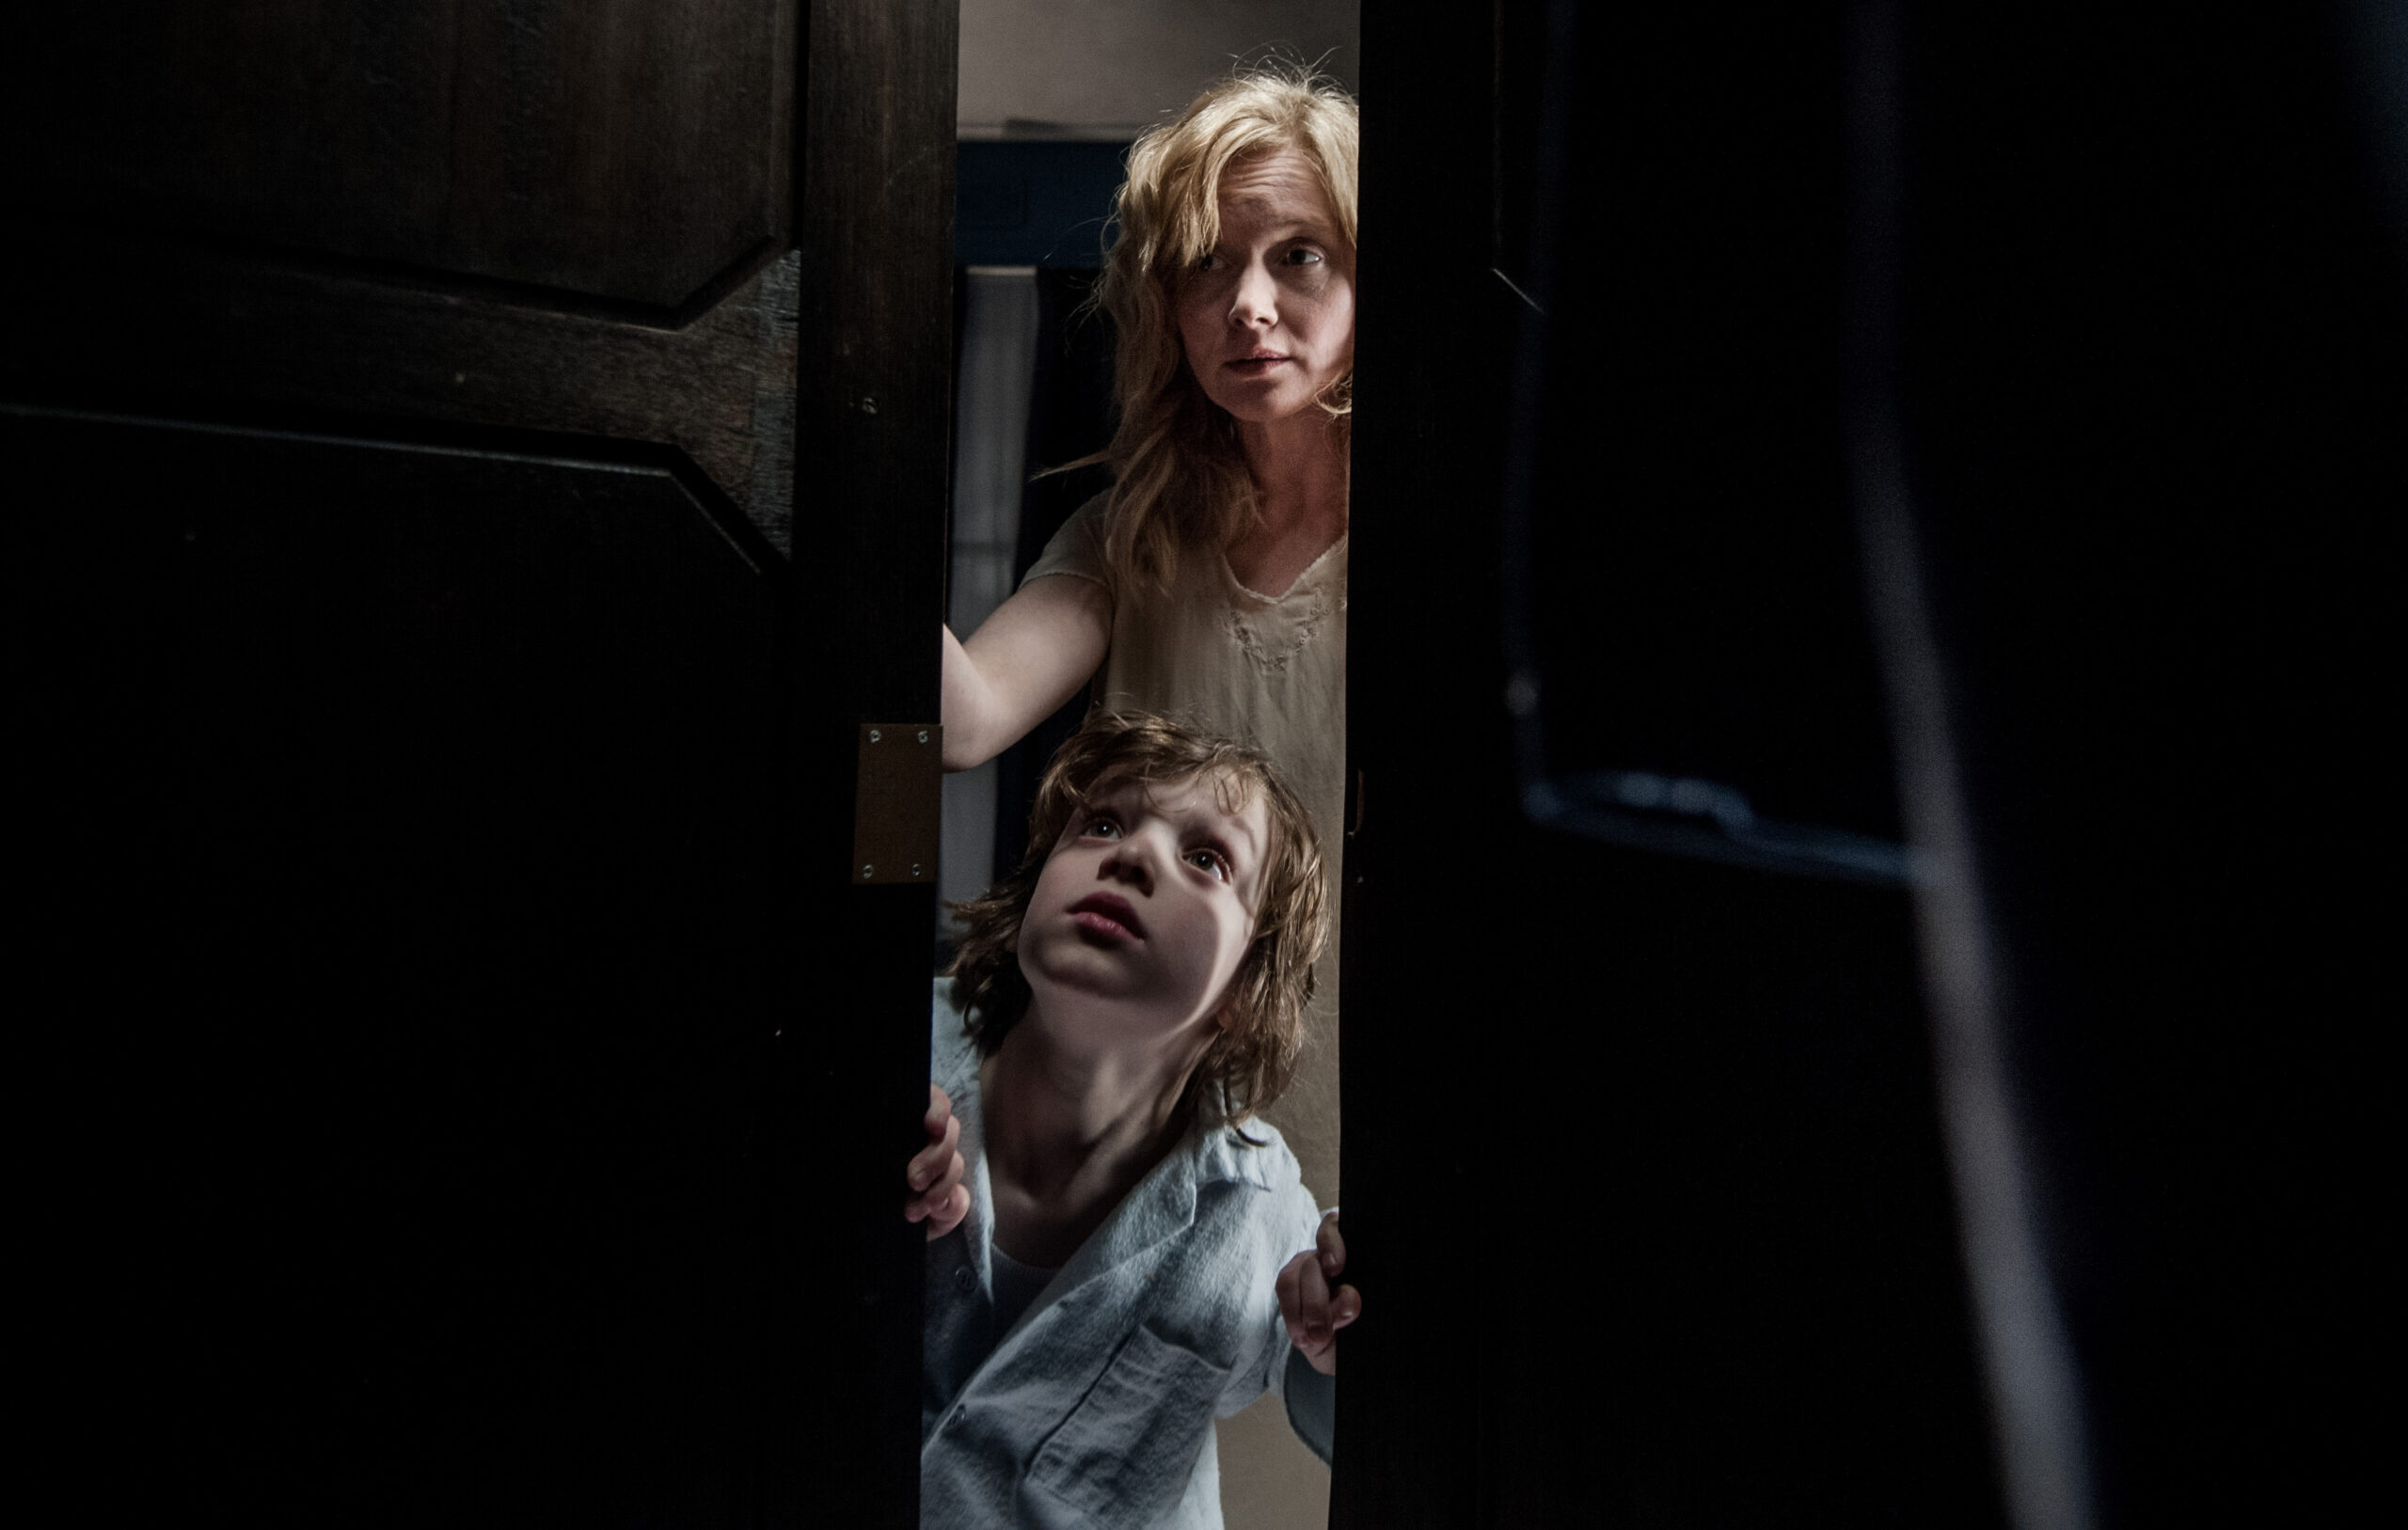 A mother and child looking through a closet door